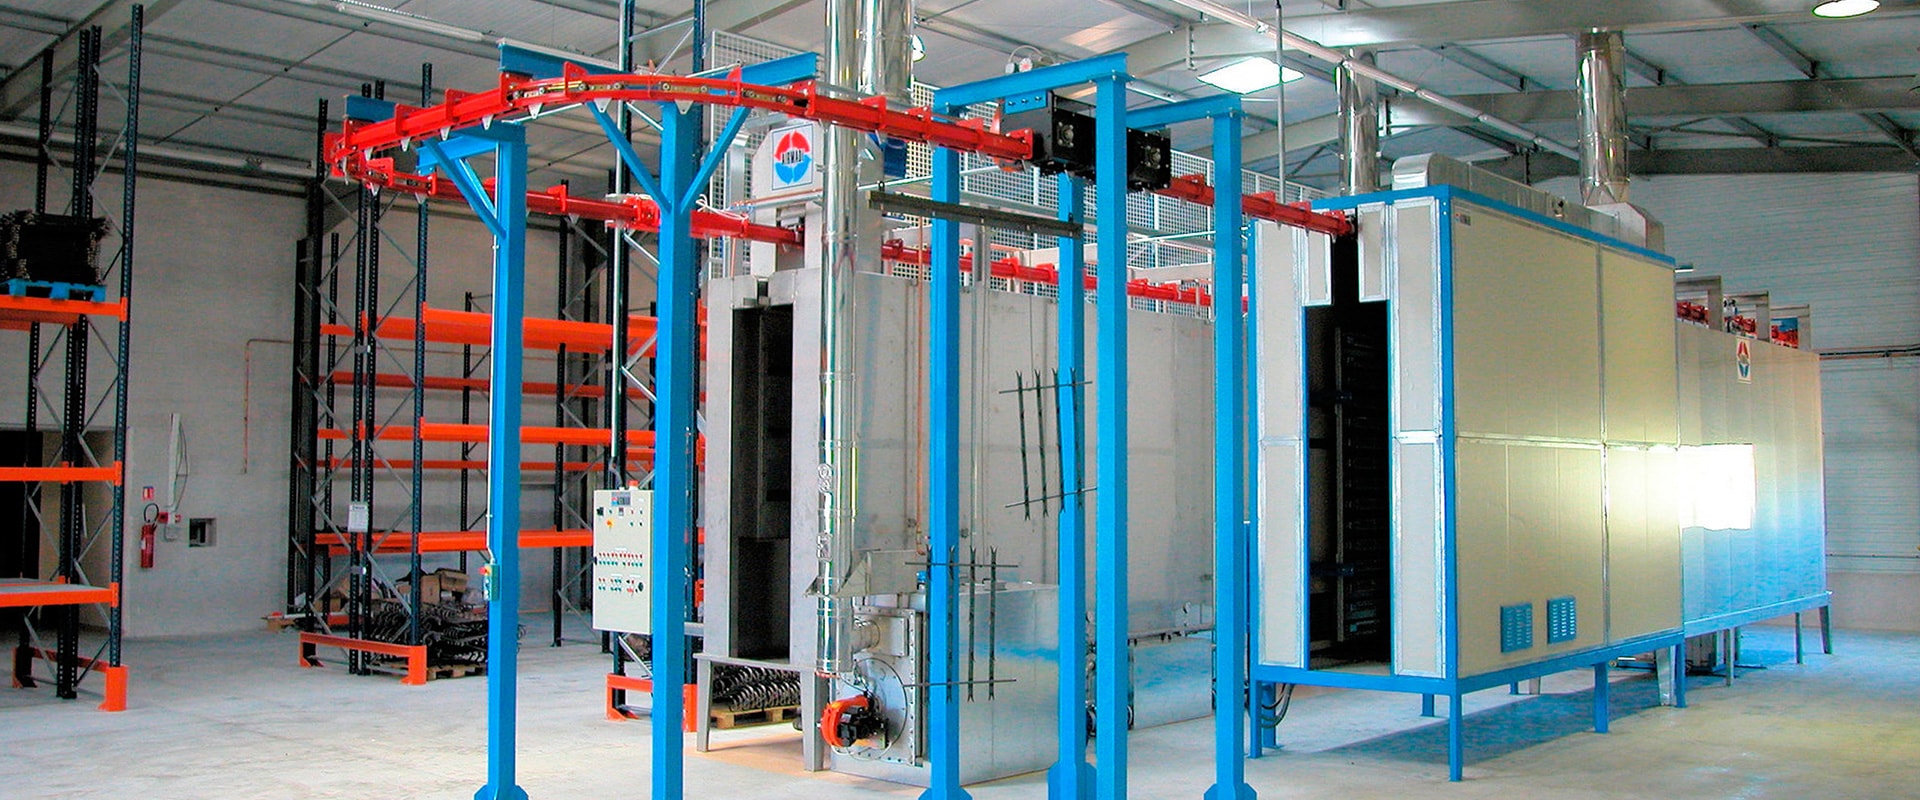 Smart Solutions for Industrial Coatings